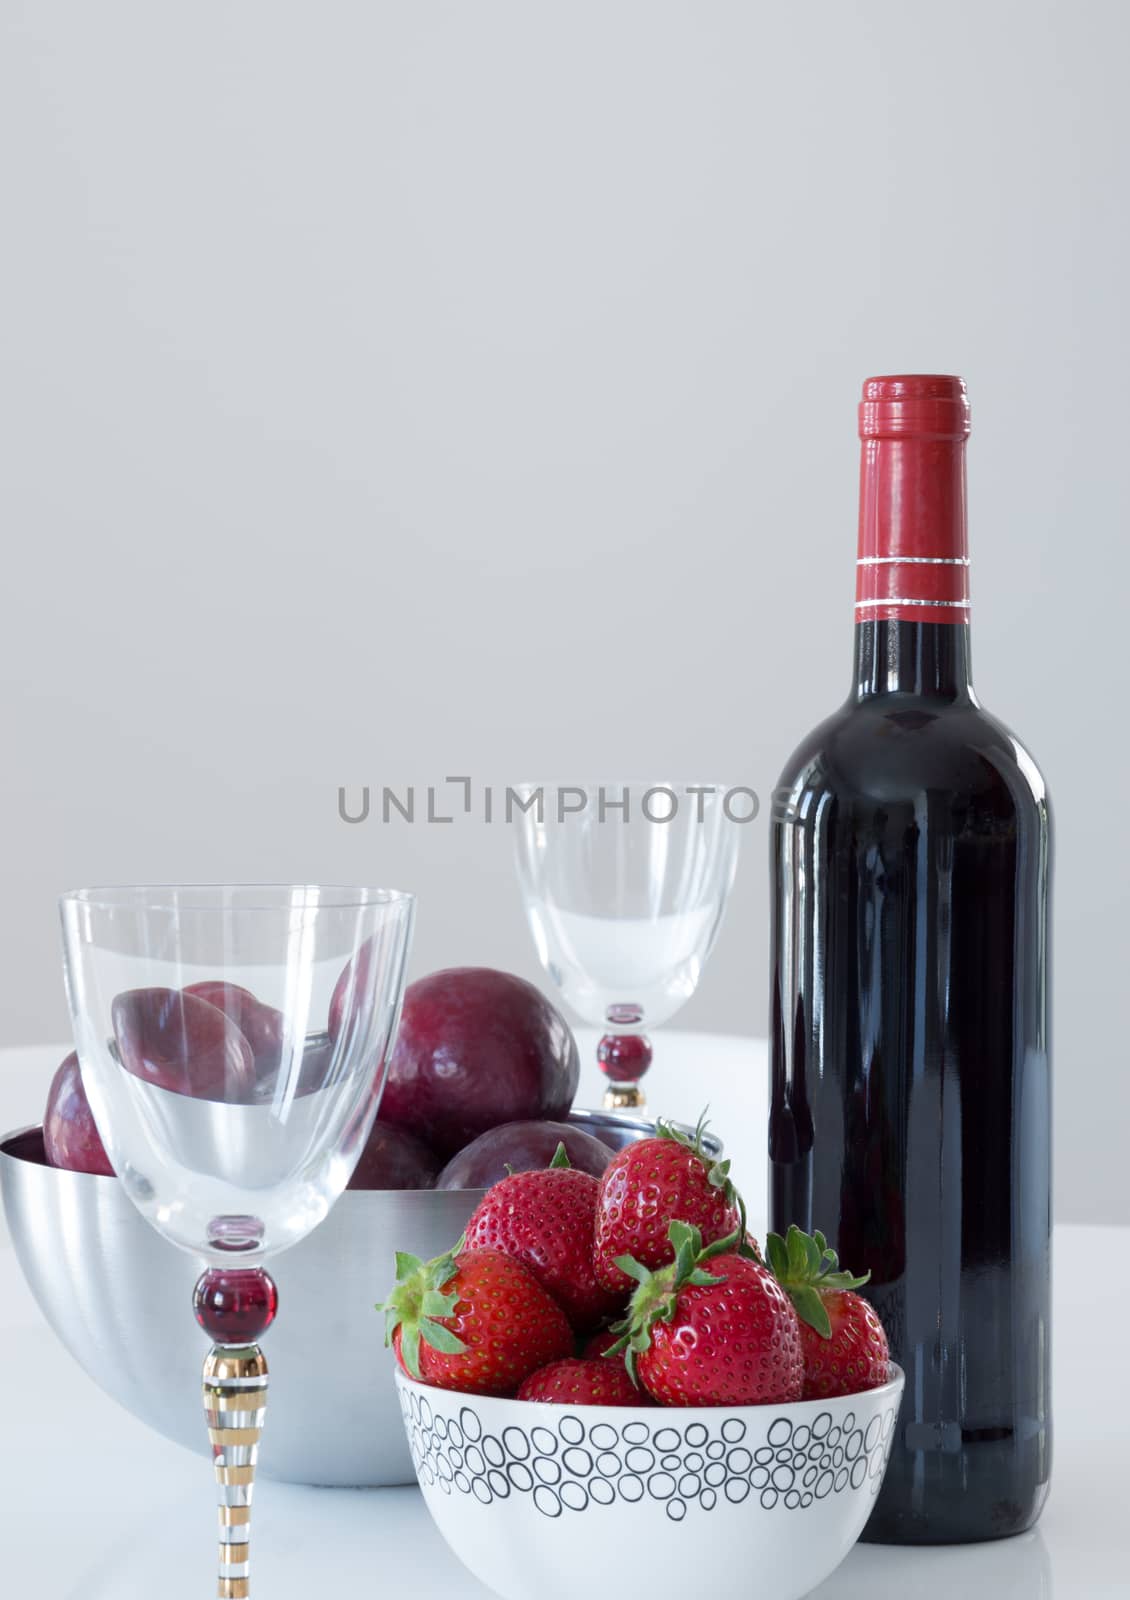 Red wine, plums and strawberries by anikasalsera